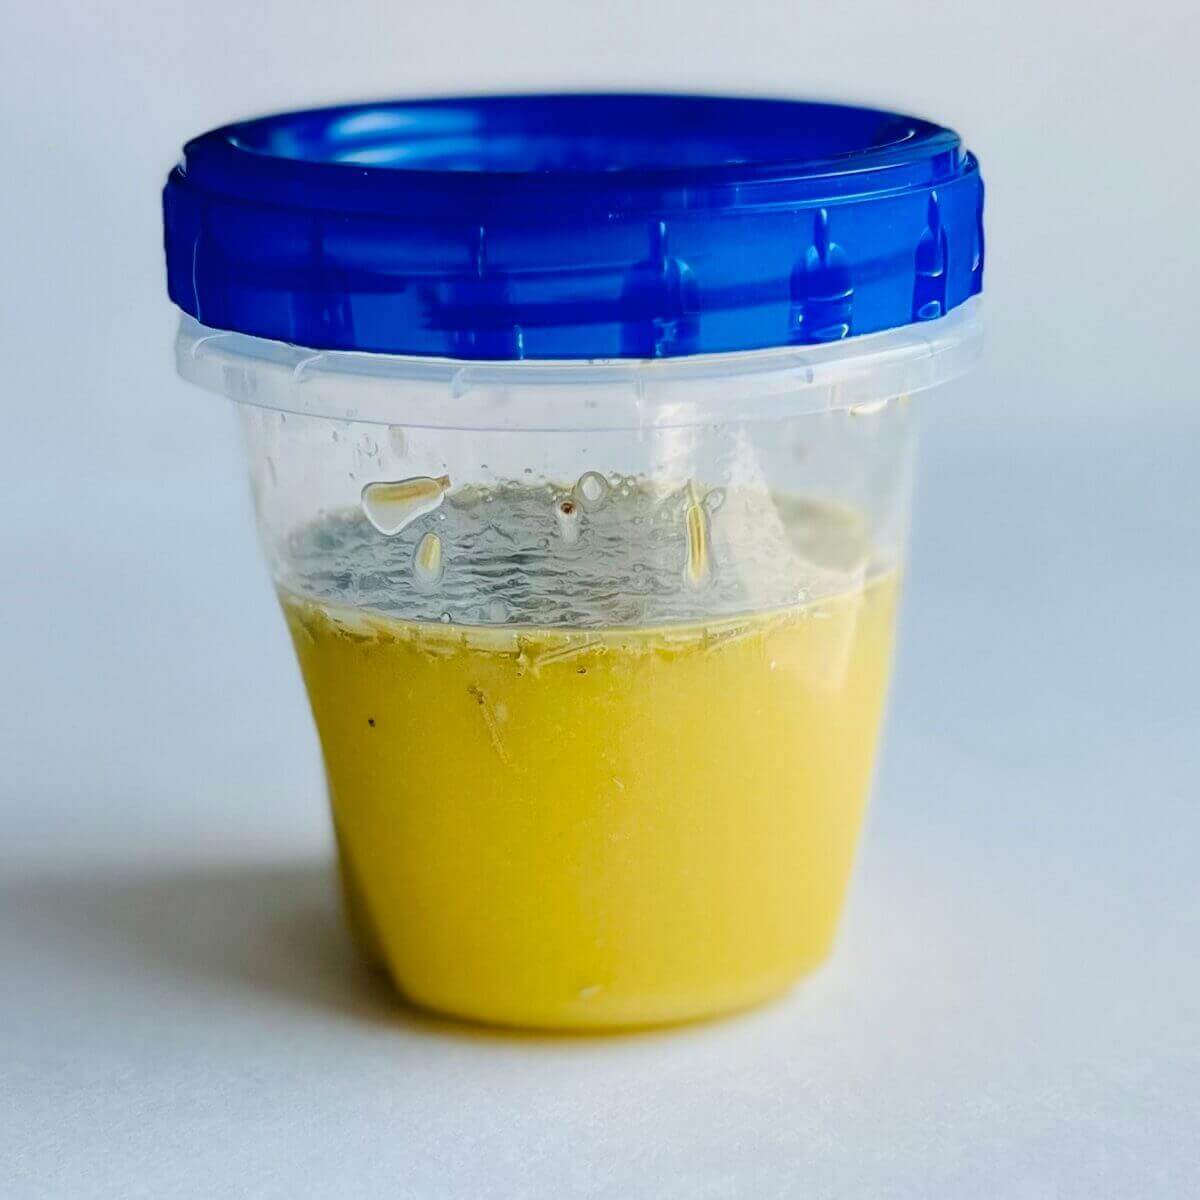 Rosemary dressing in a clear plastic container with a blue lid.